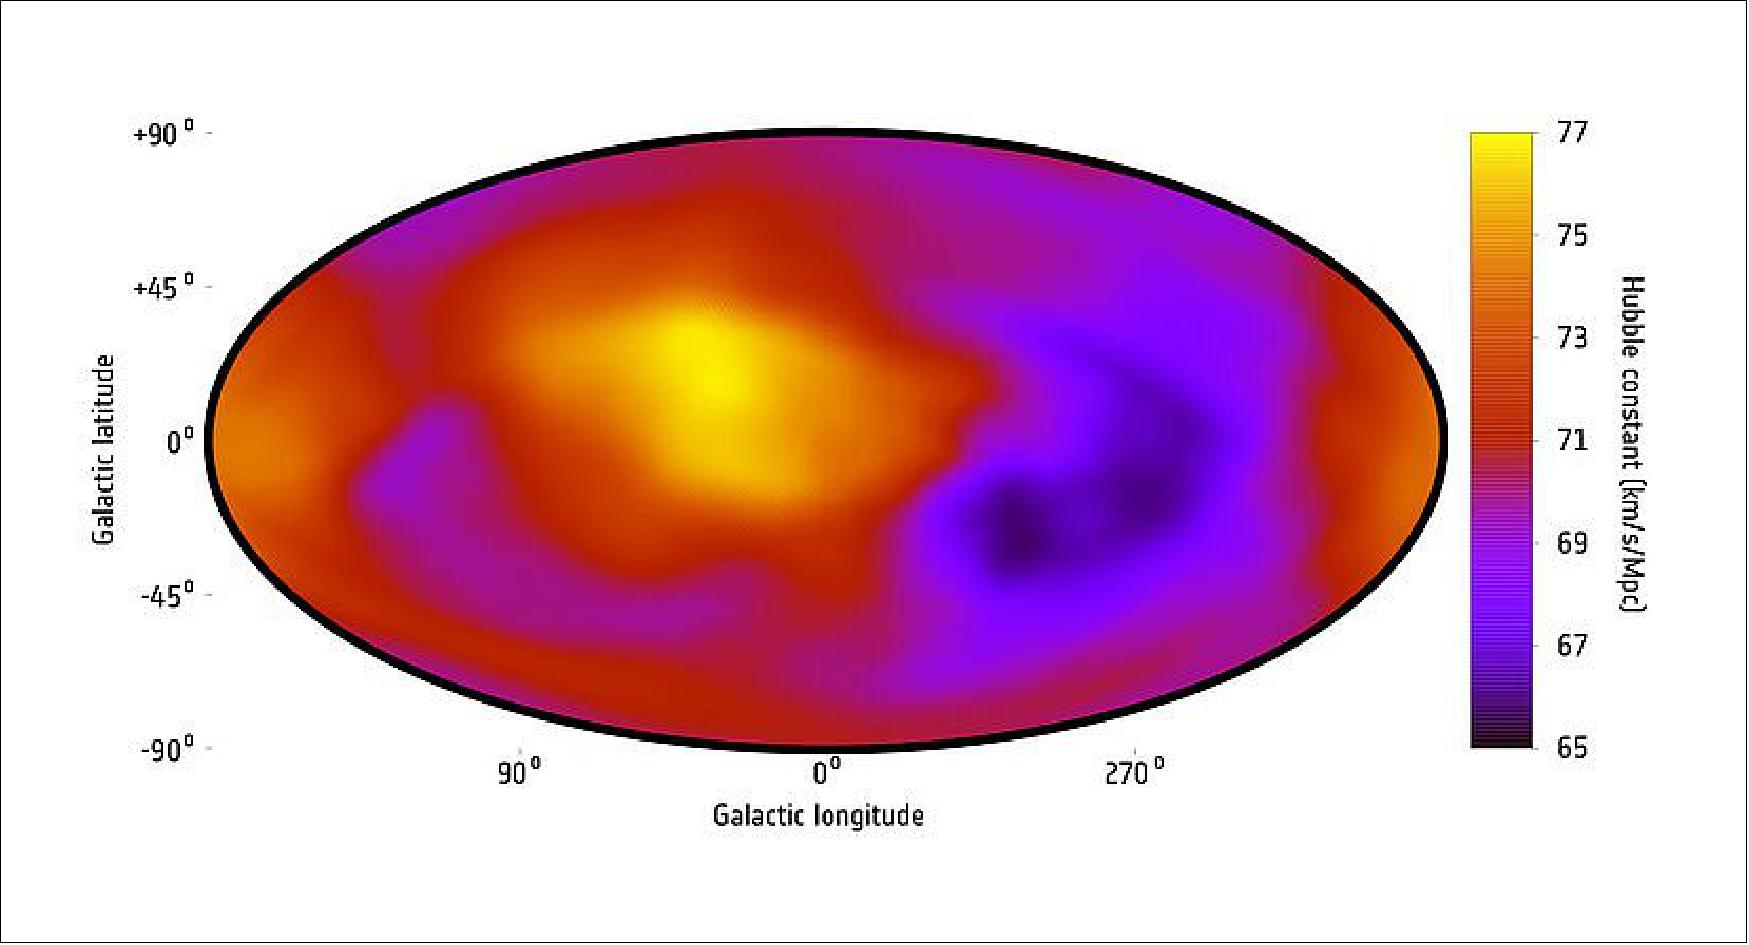 Figure 36: Cosmic expansion measured across the sky. A map showing the rate of expansion of the universe in different directions across the sky based on data from ESA's XMM-Newton, NASA's Chandra and the German-led ROSAT X-ray observatories (image credit: K. Migkas et al. 2020, CC BY-SA 3.0 IGO)